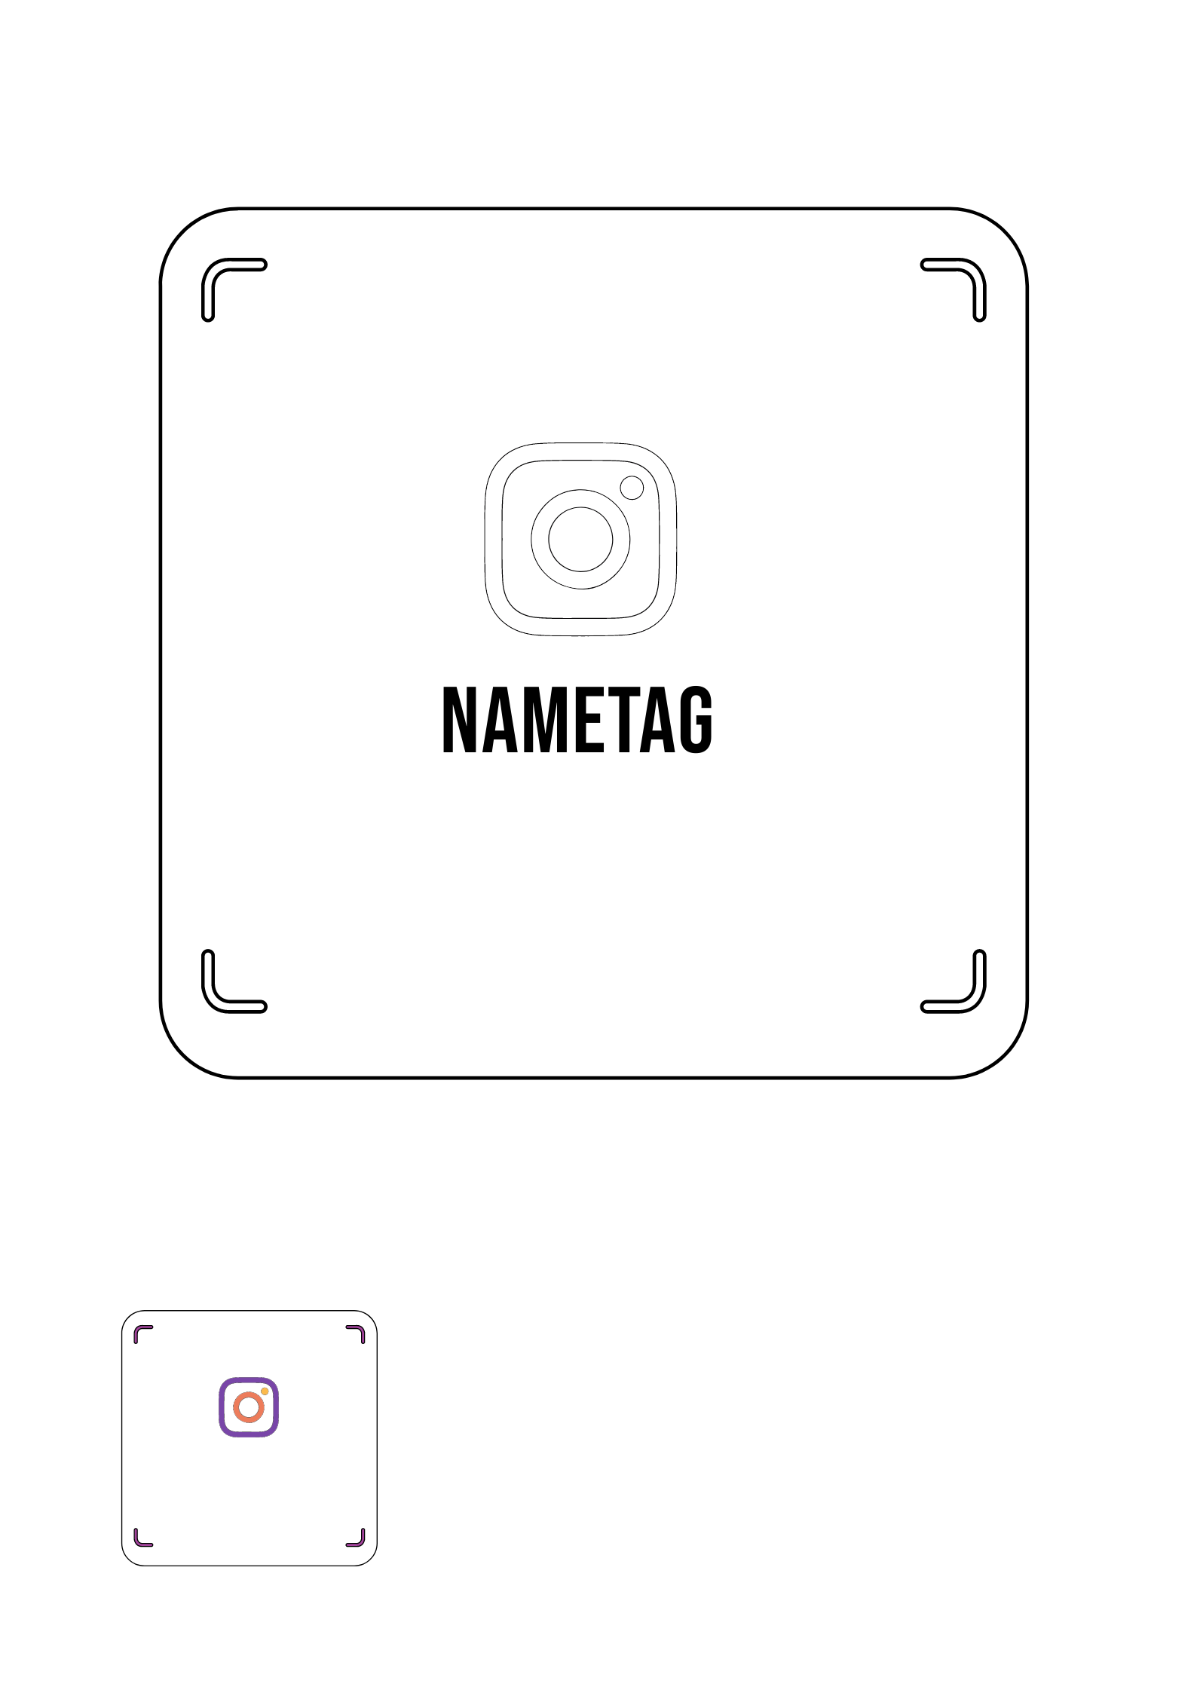 Instagram Name Tag Coloring Page Template